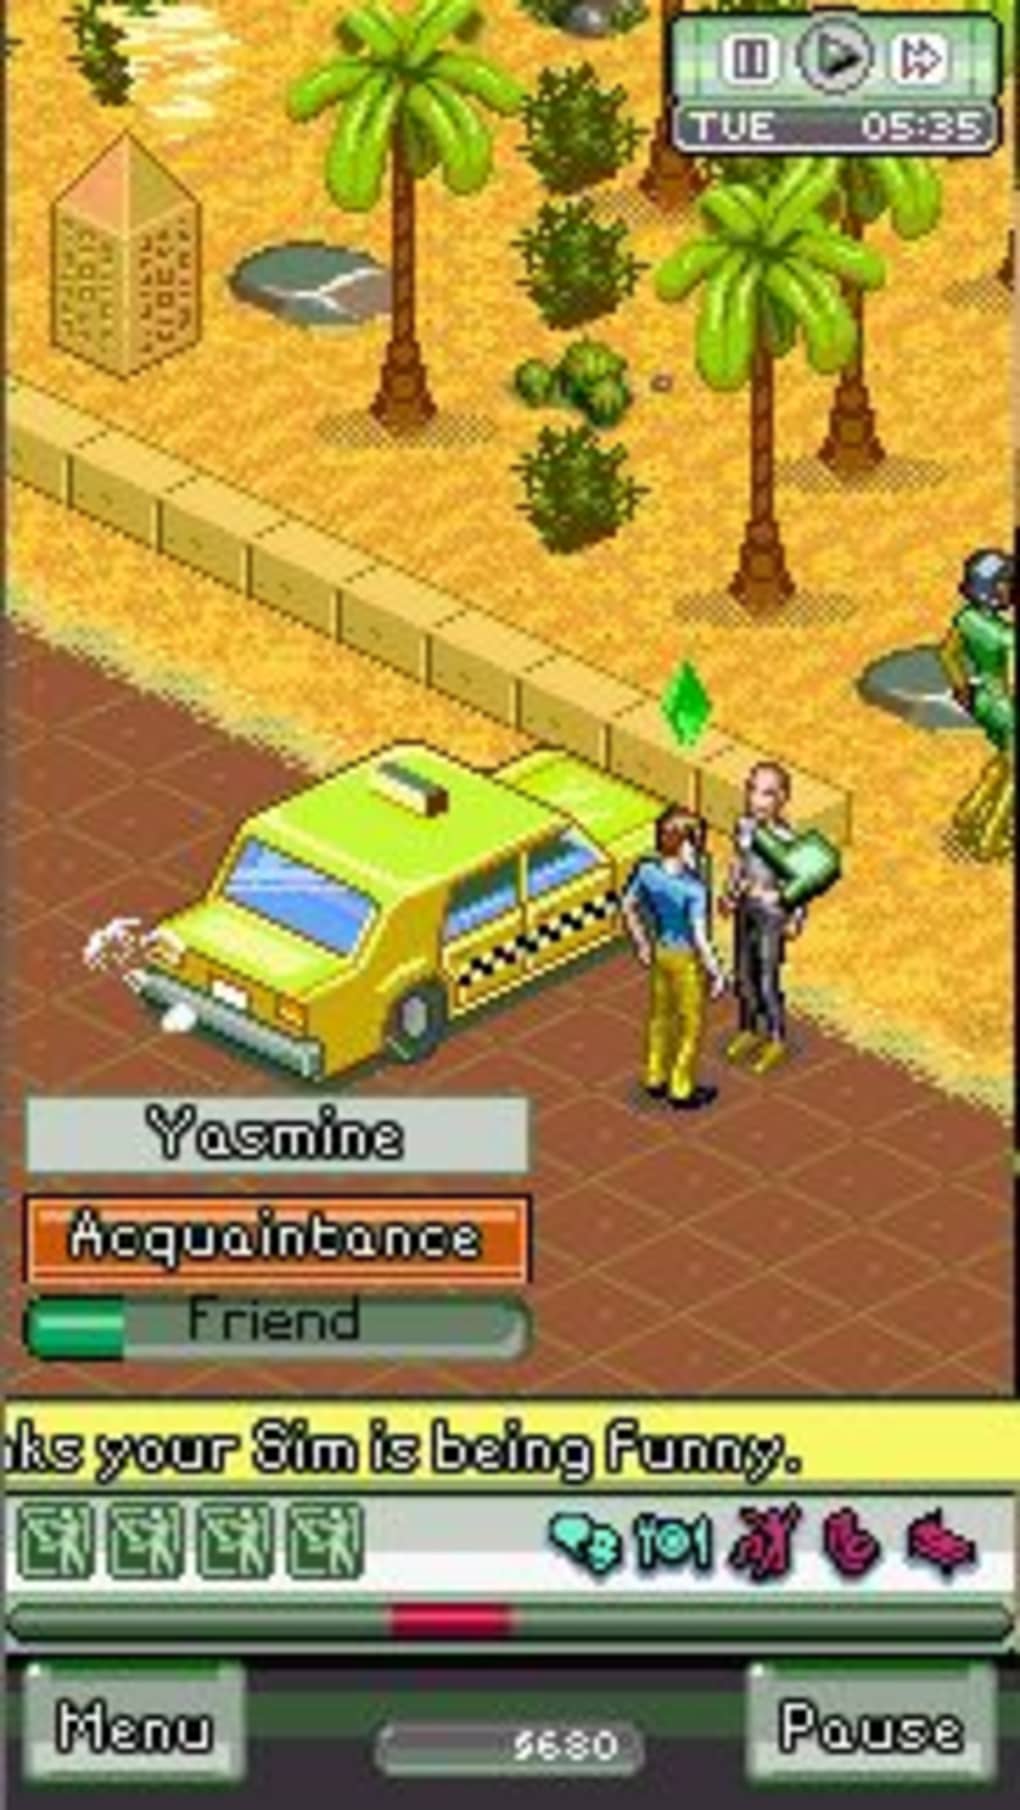 Download the sims 3 world adventure for android apk